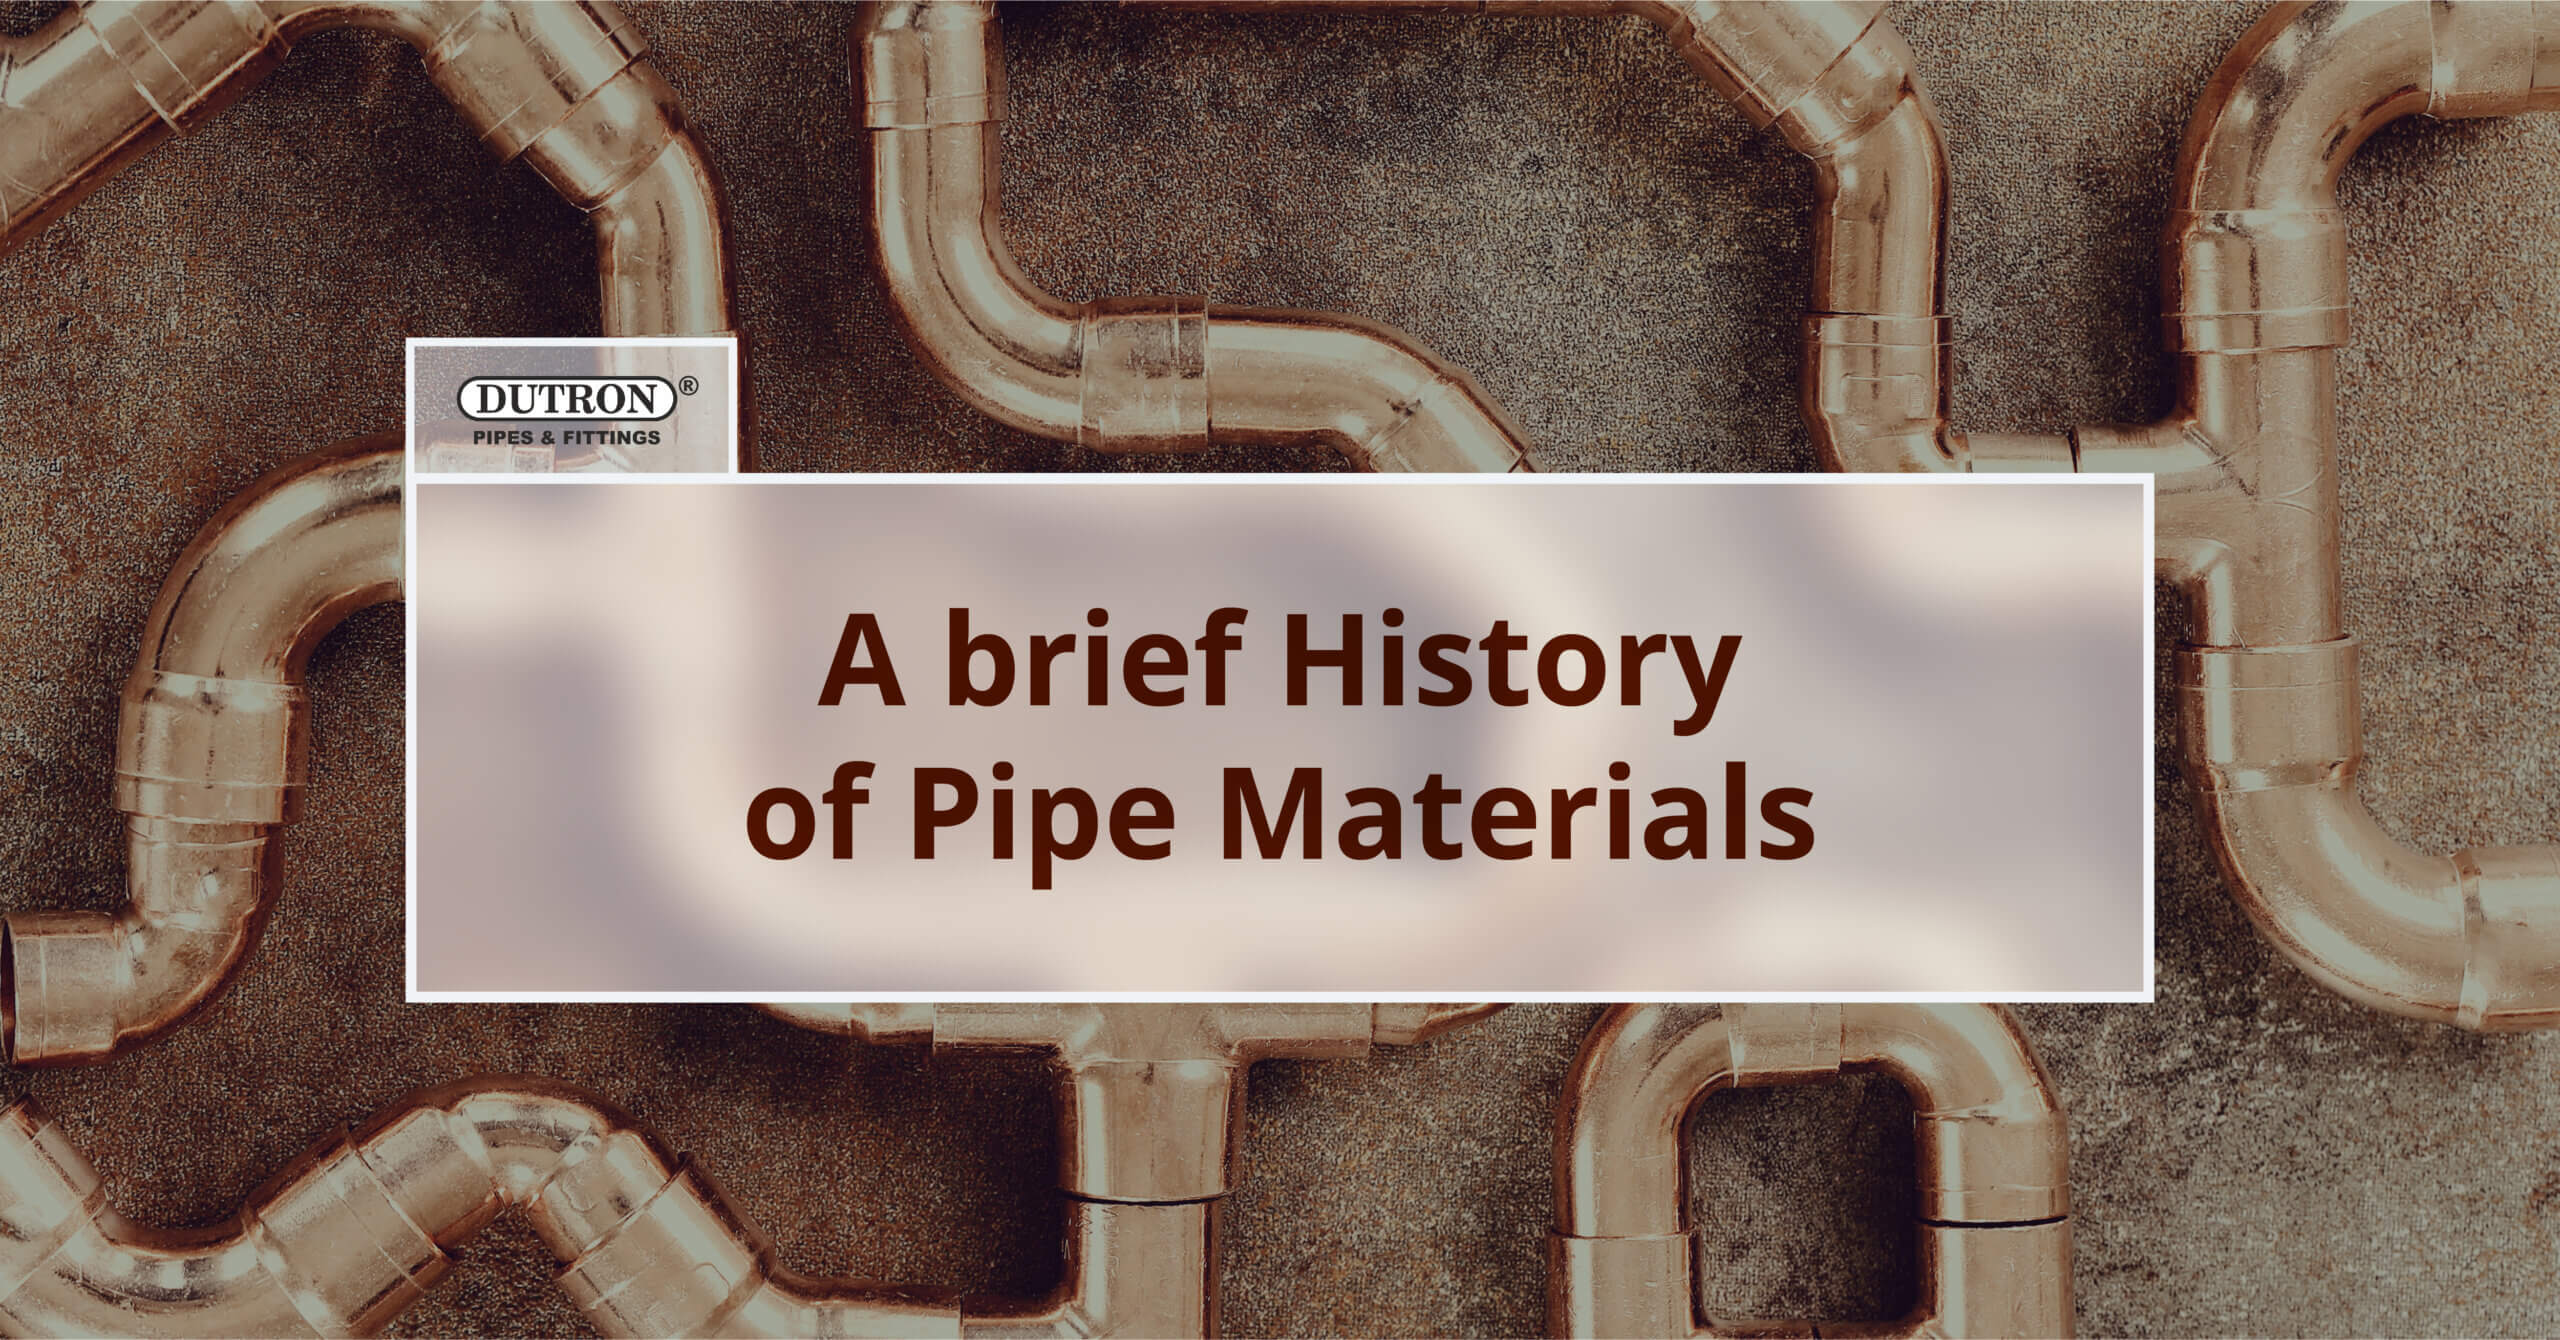 History of Pipes